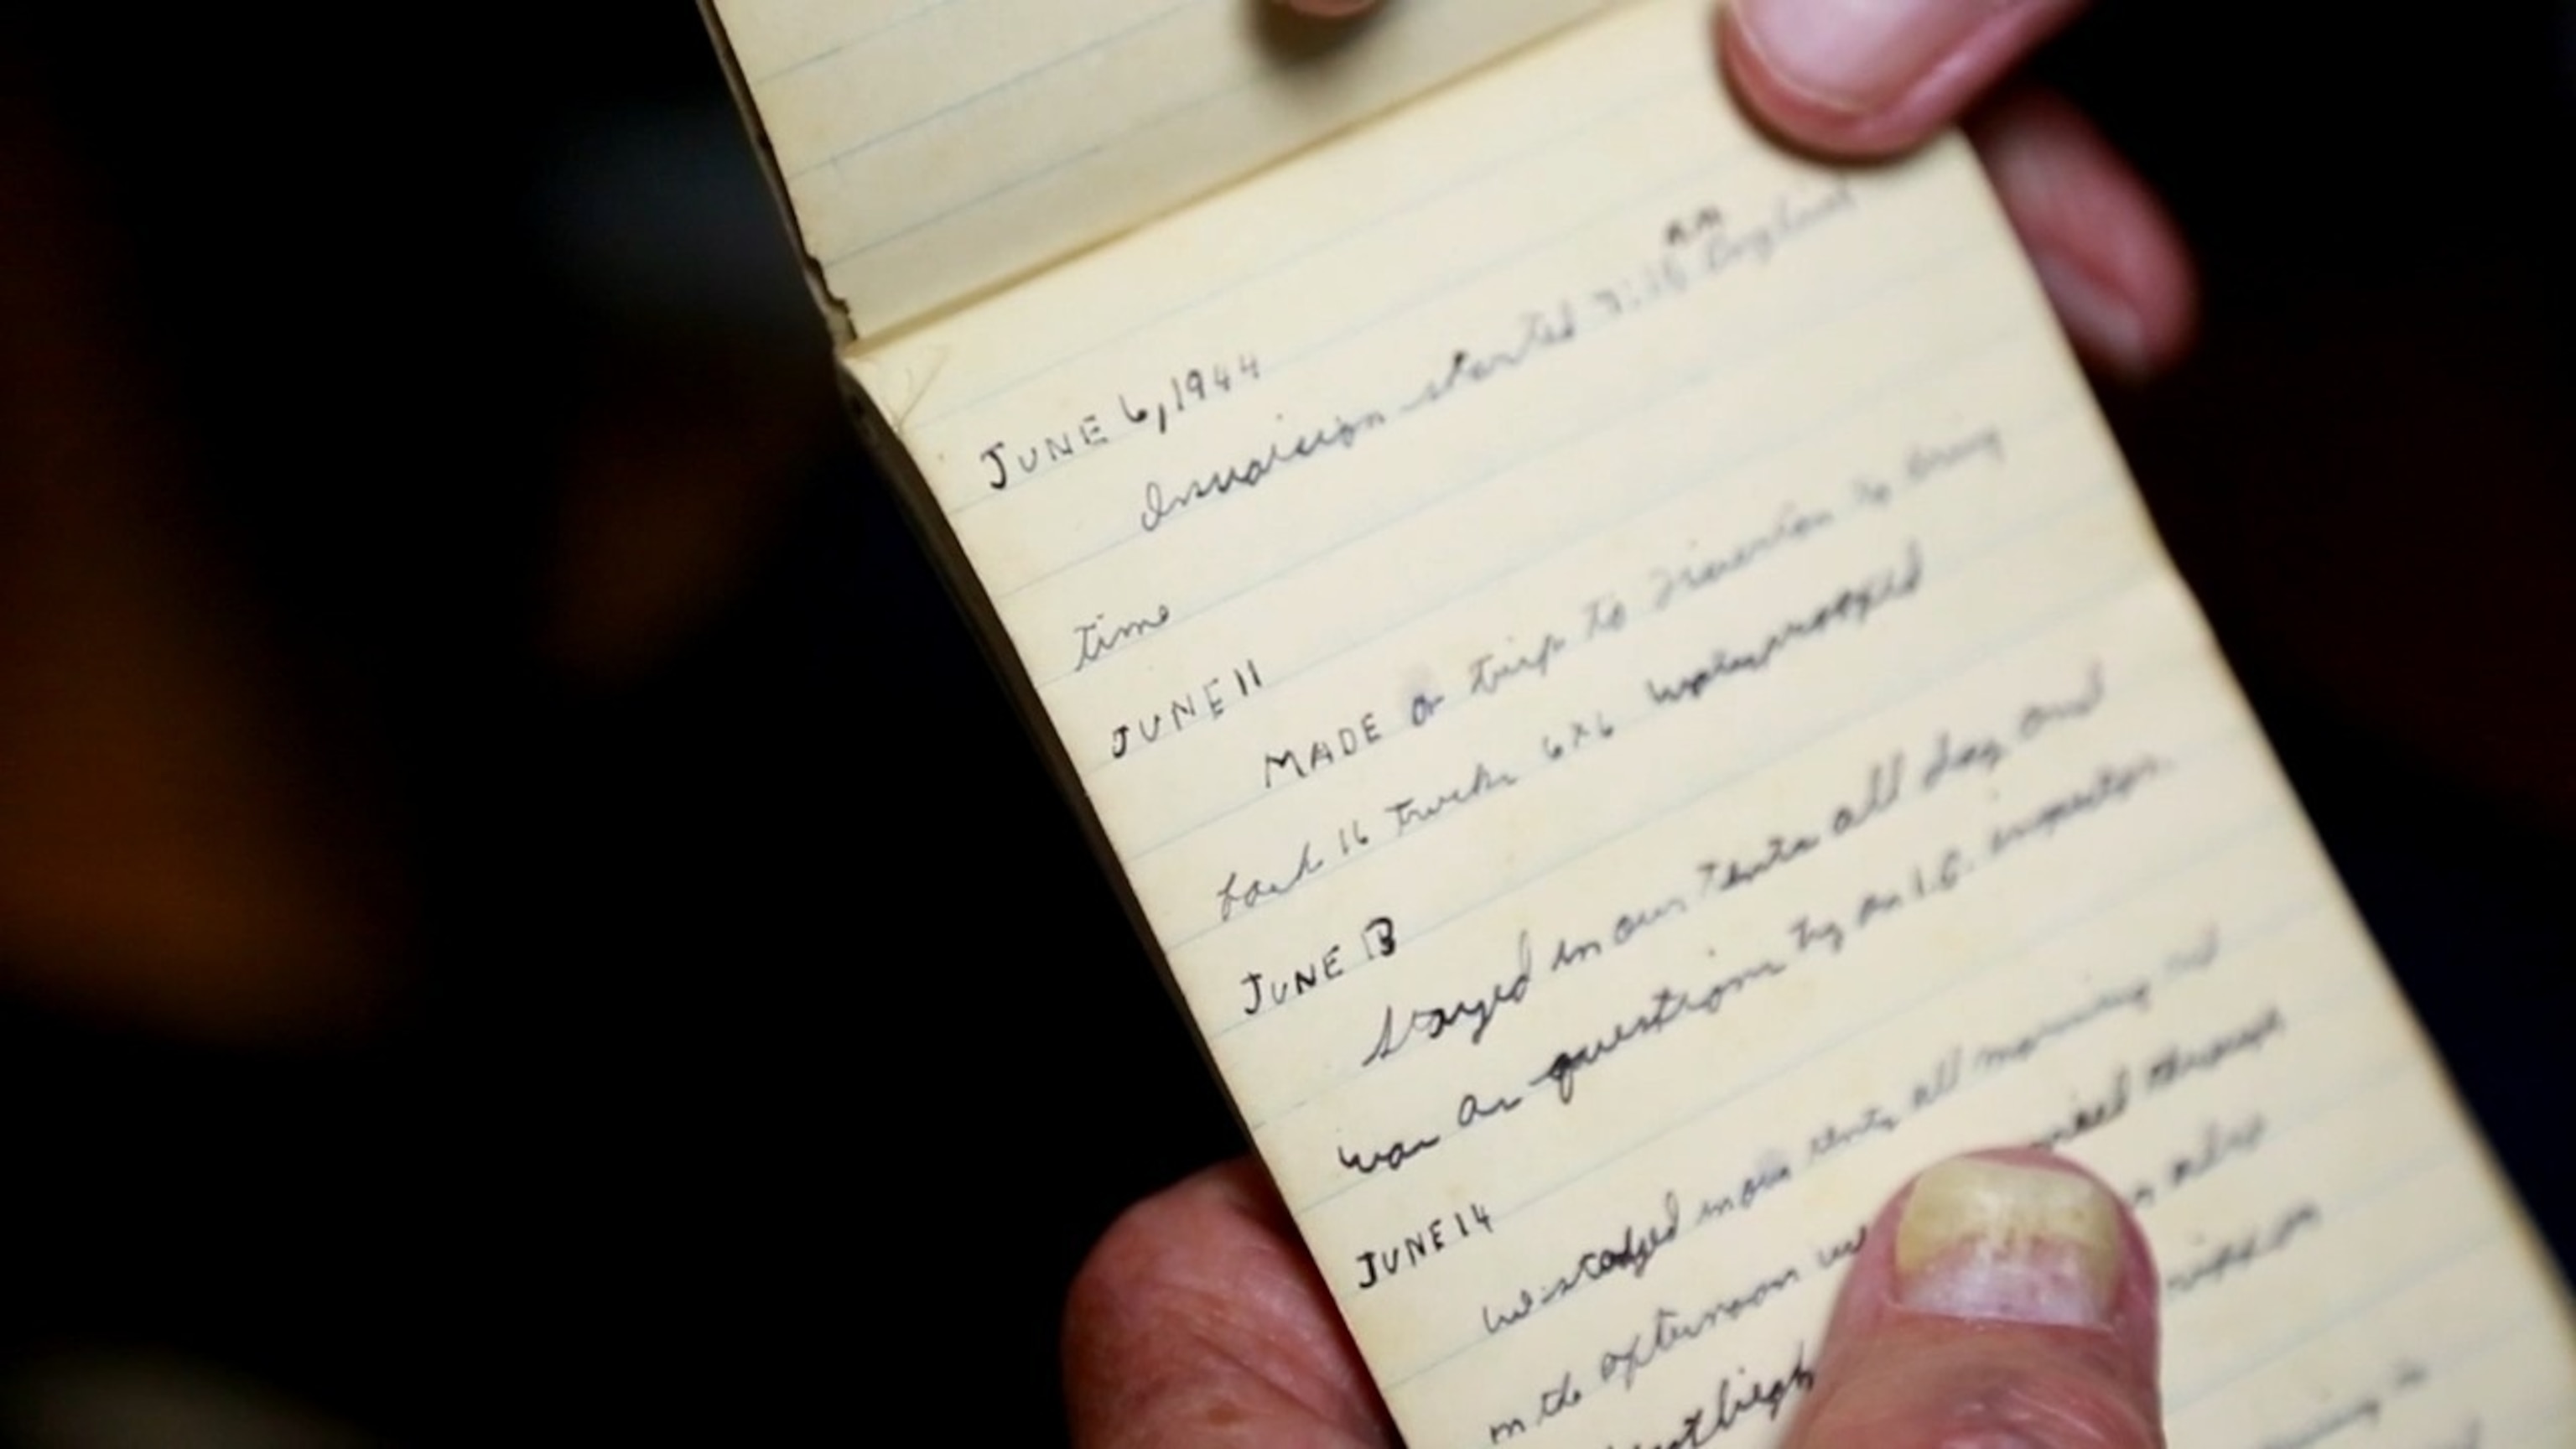 PHOTO: World War II veteran Harold McMurran's diary documenting his time before and after the invasion of Normandy.